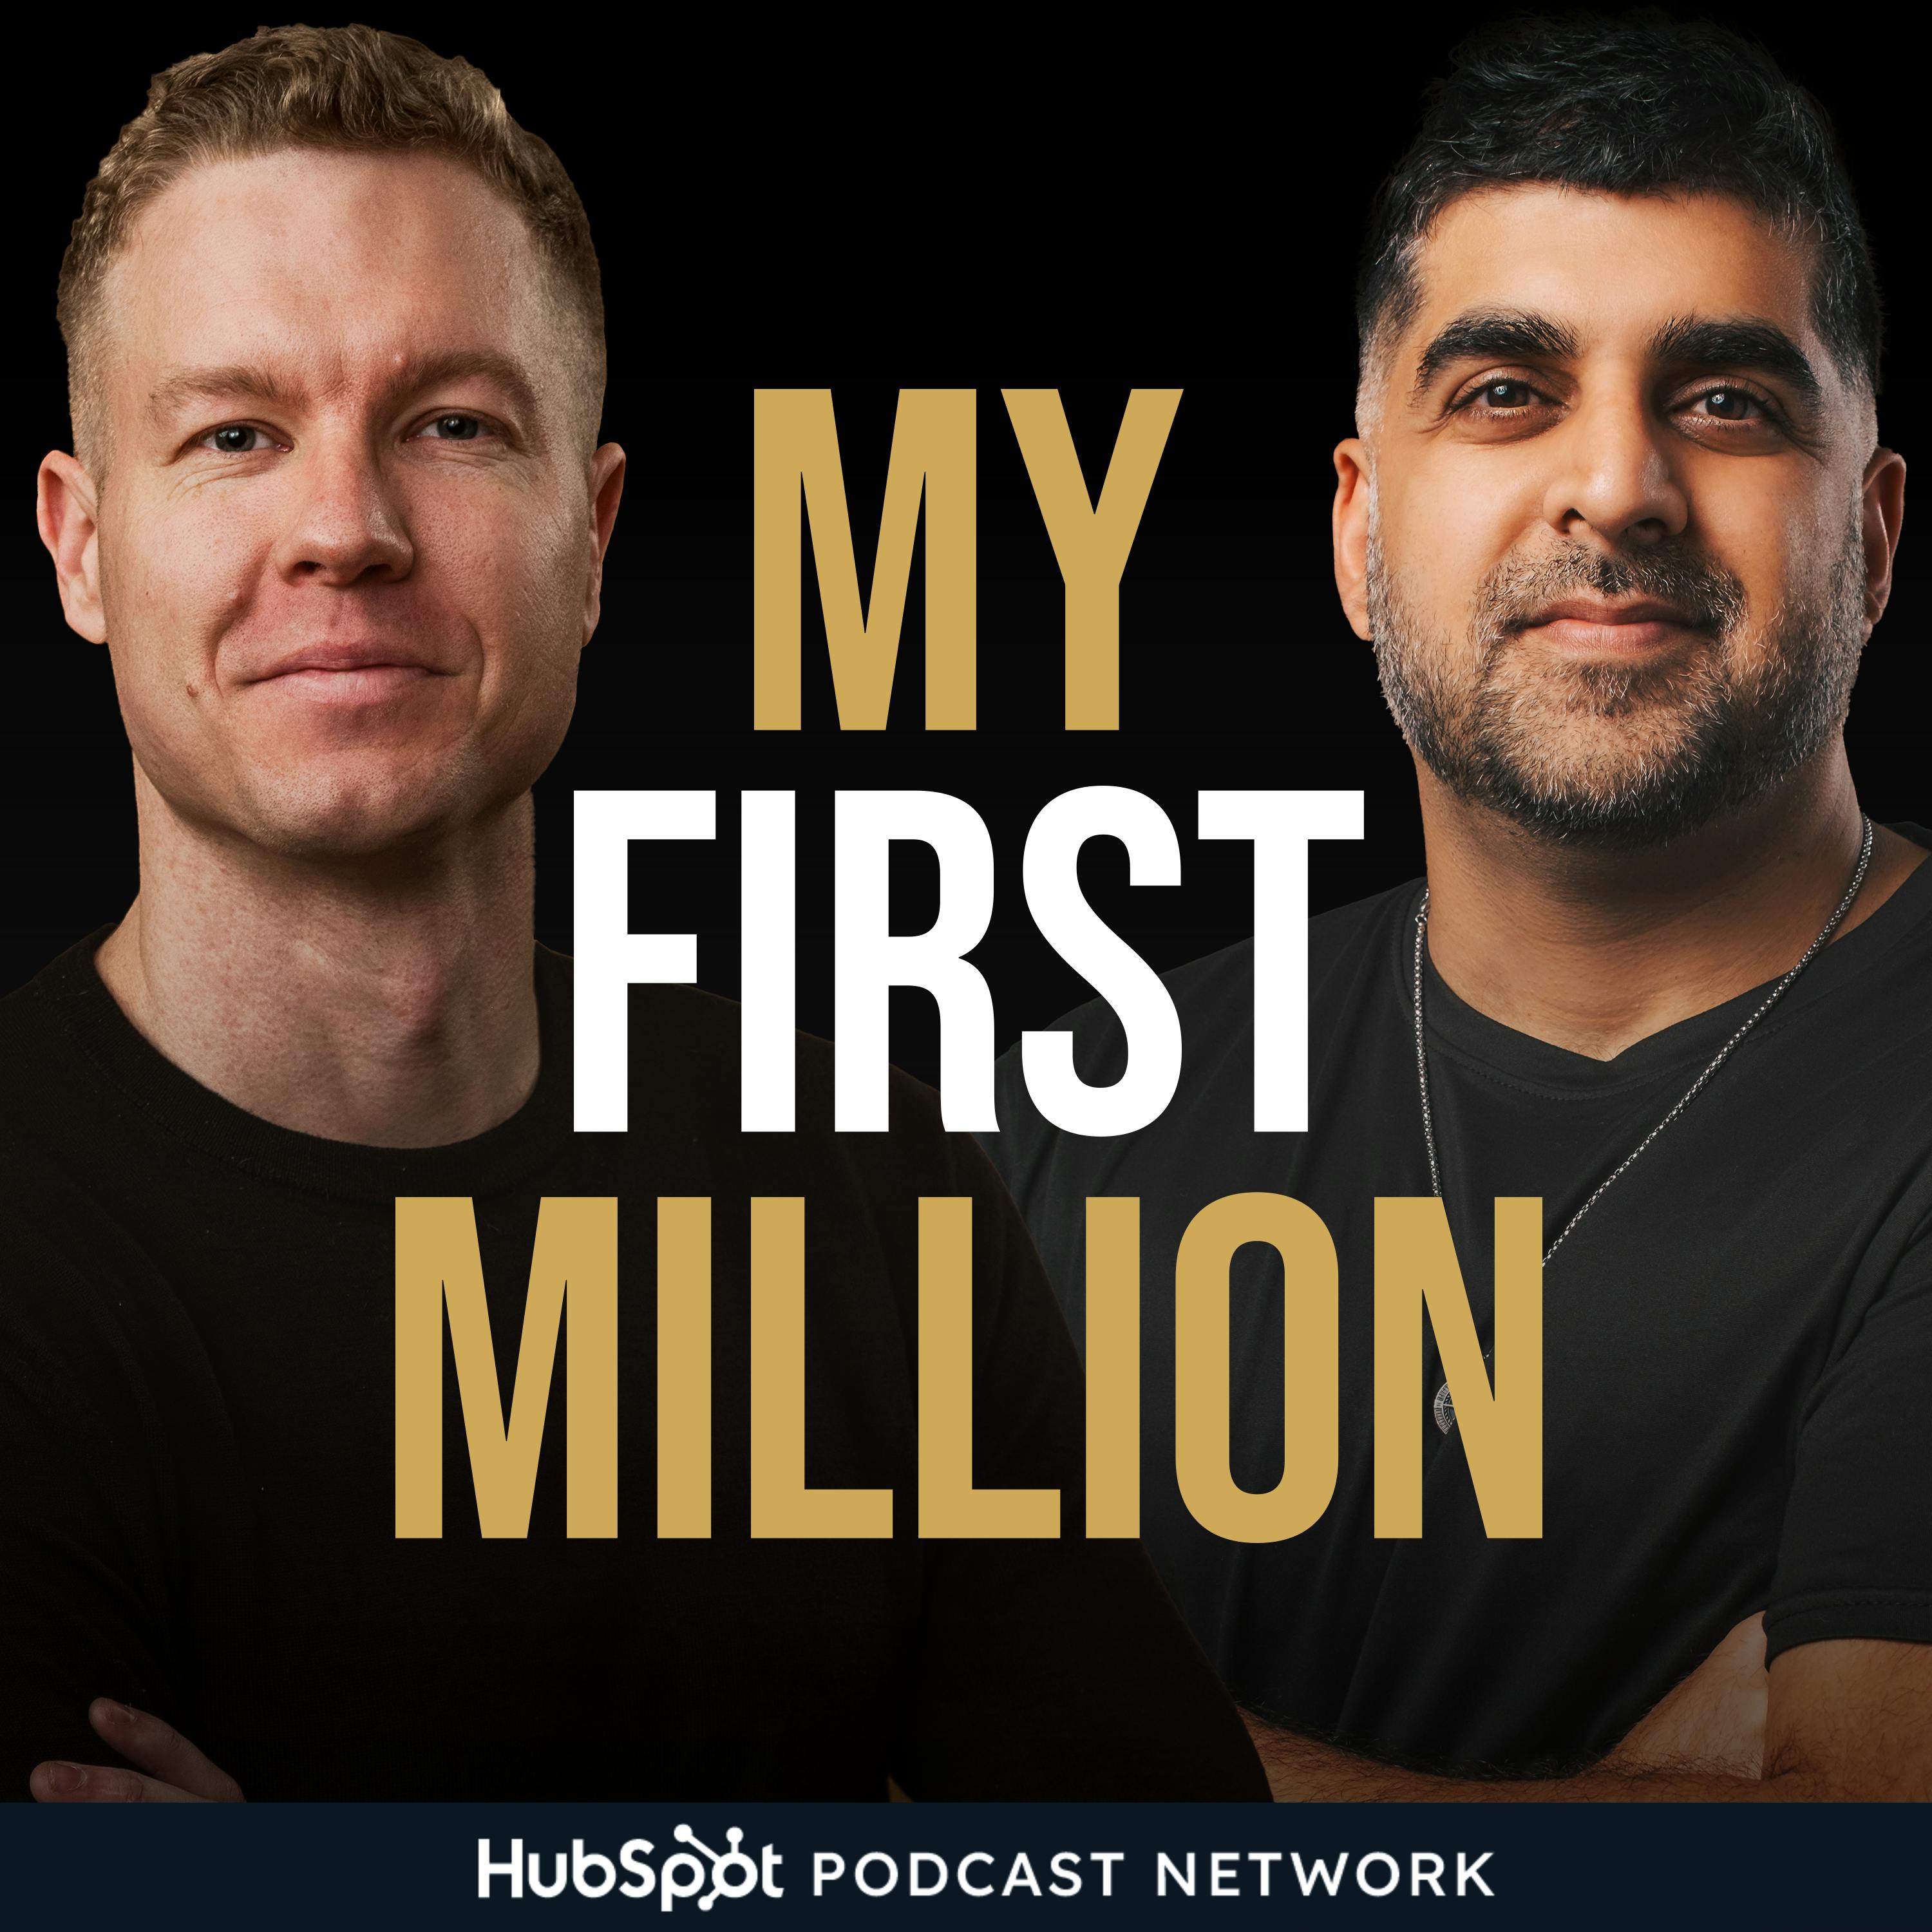 My First Million podcast show image